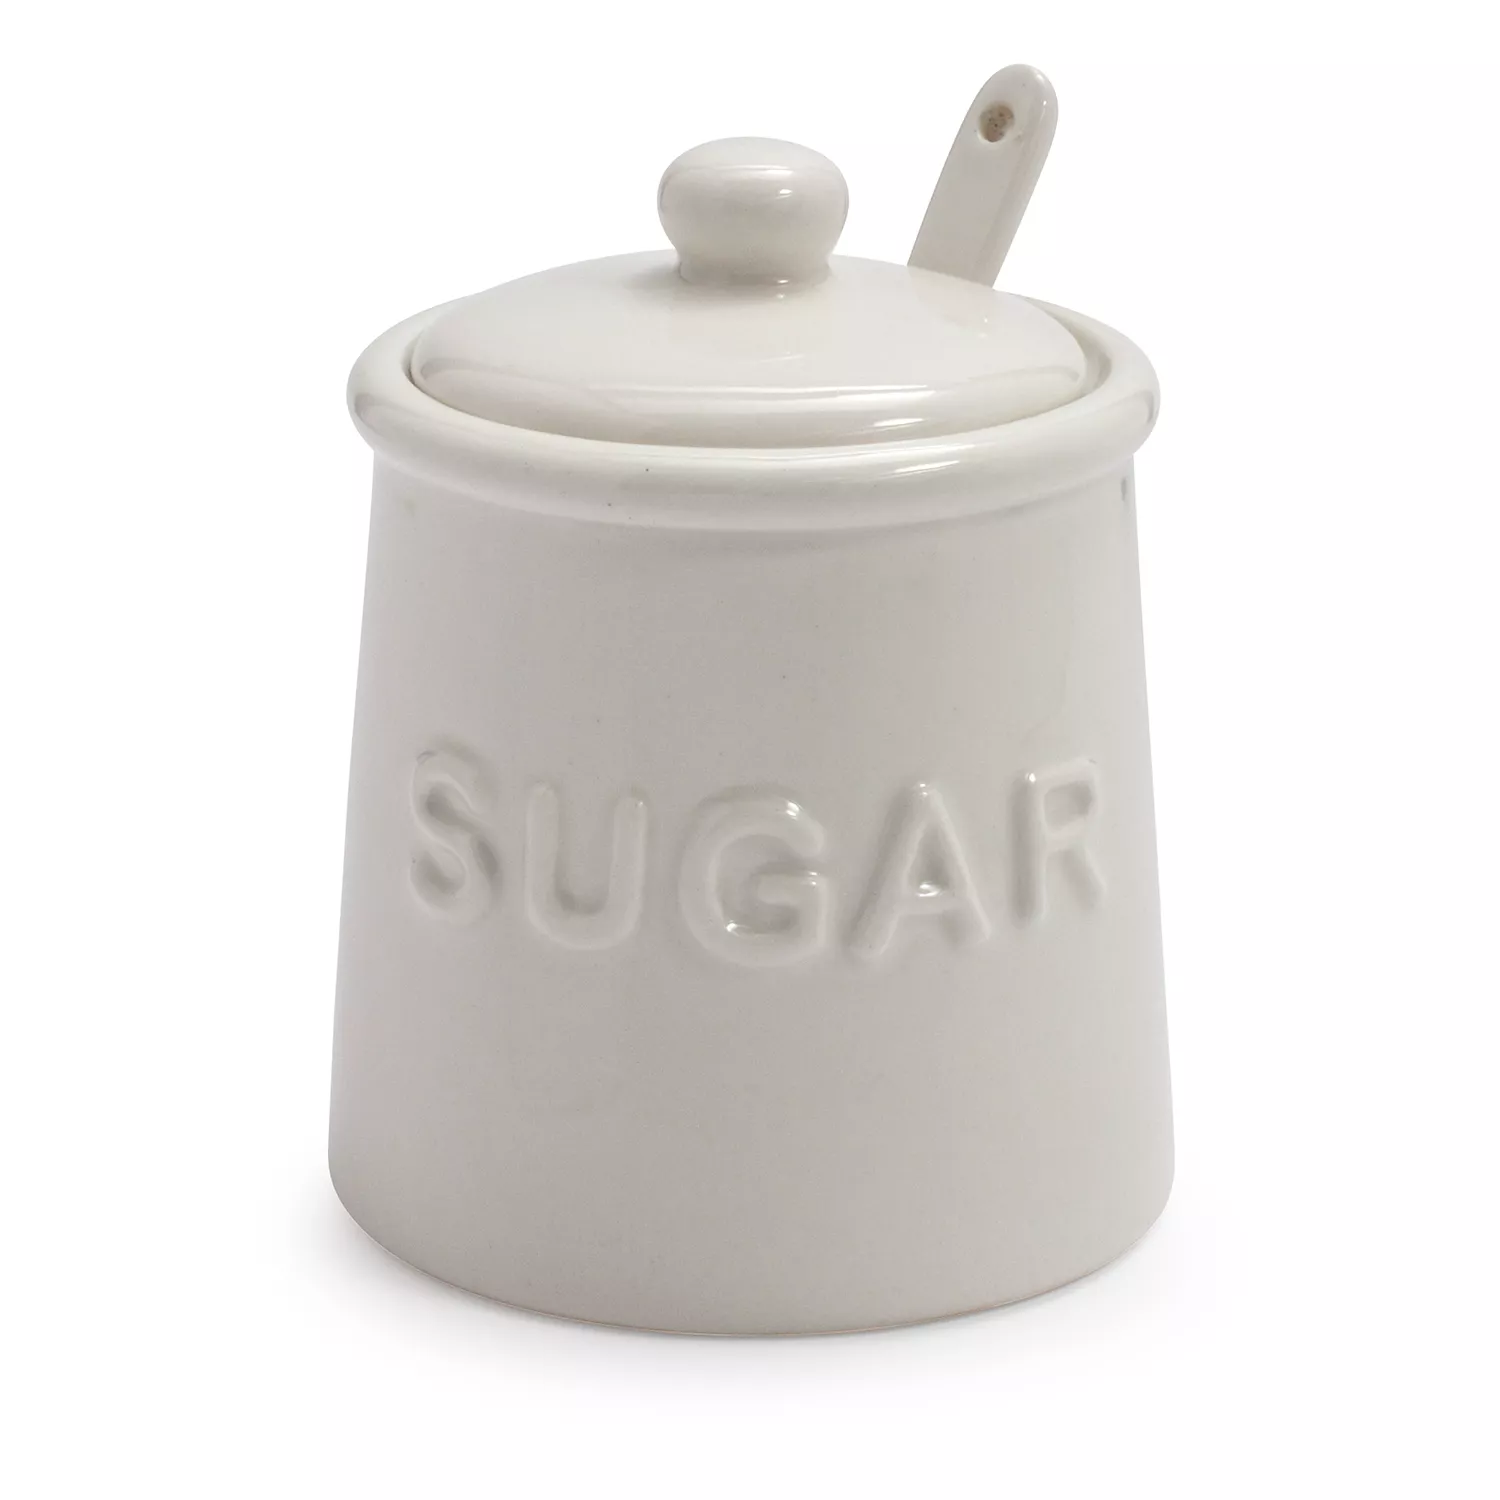 Sur La Table Sugar Bowl with Lid and Serving Spoon